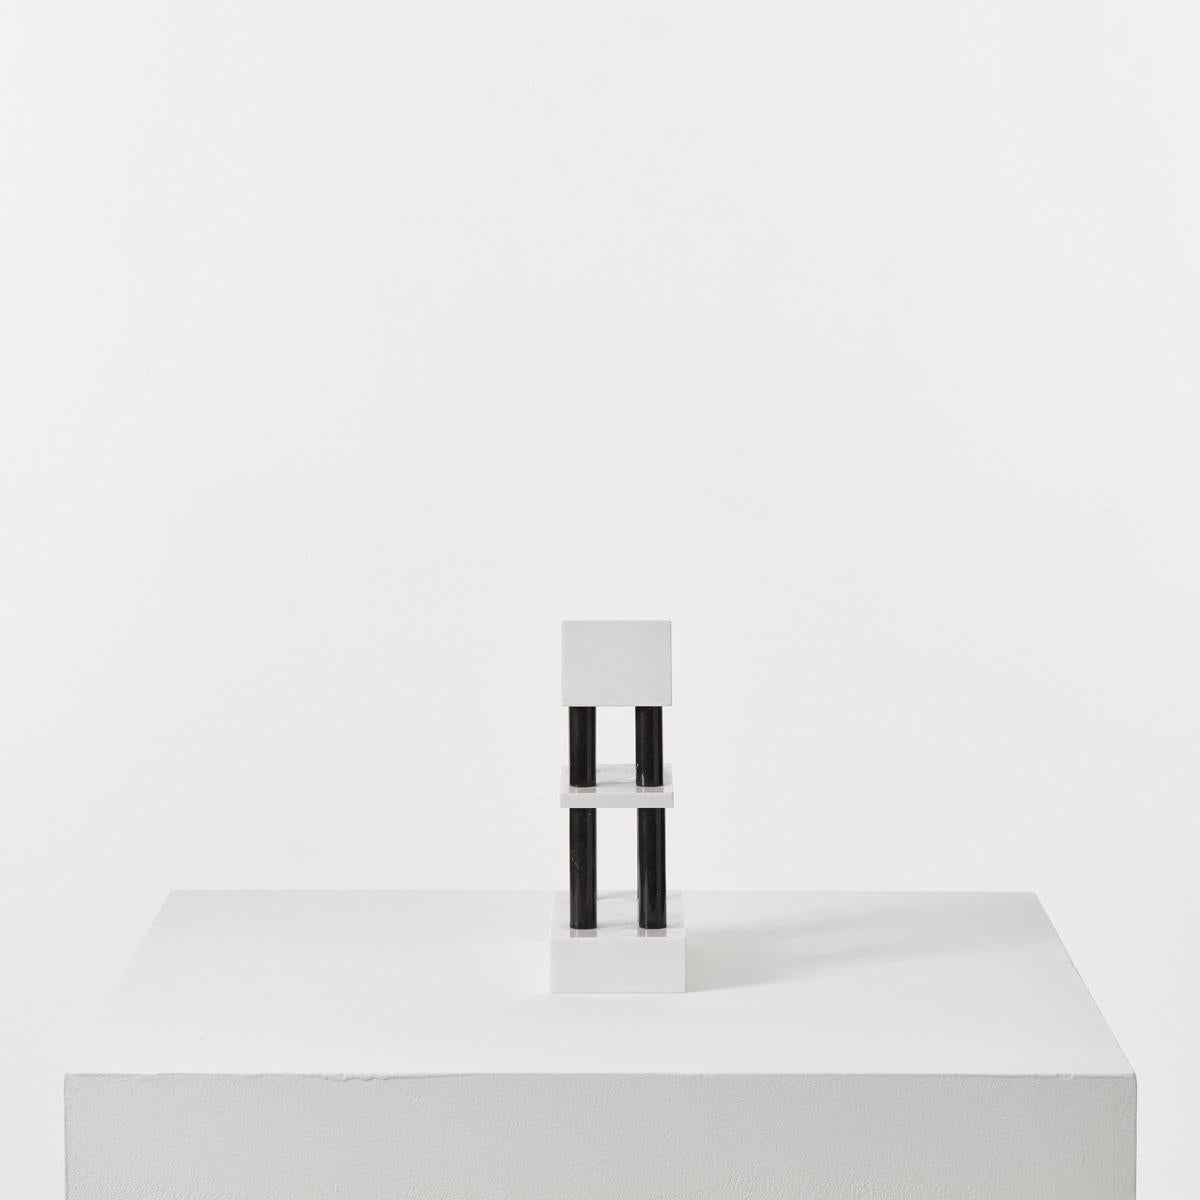 Post-Modern Architectural Sculpture by Sottsass for Ultima Edizione, Italy 1986 For Sale